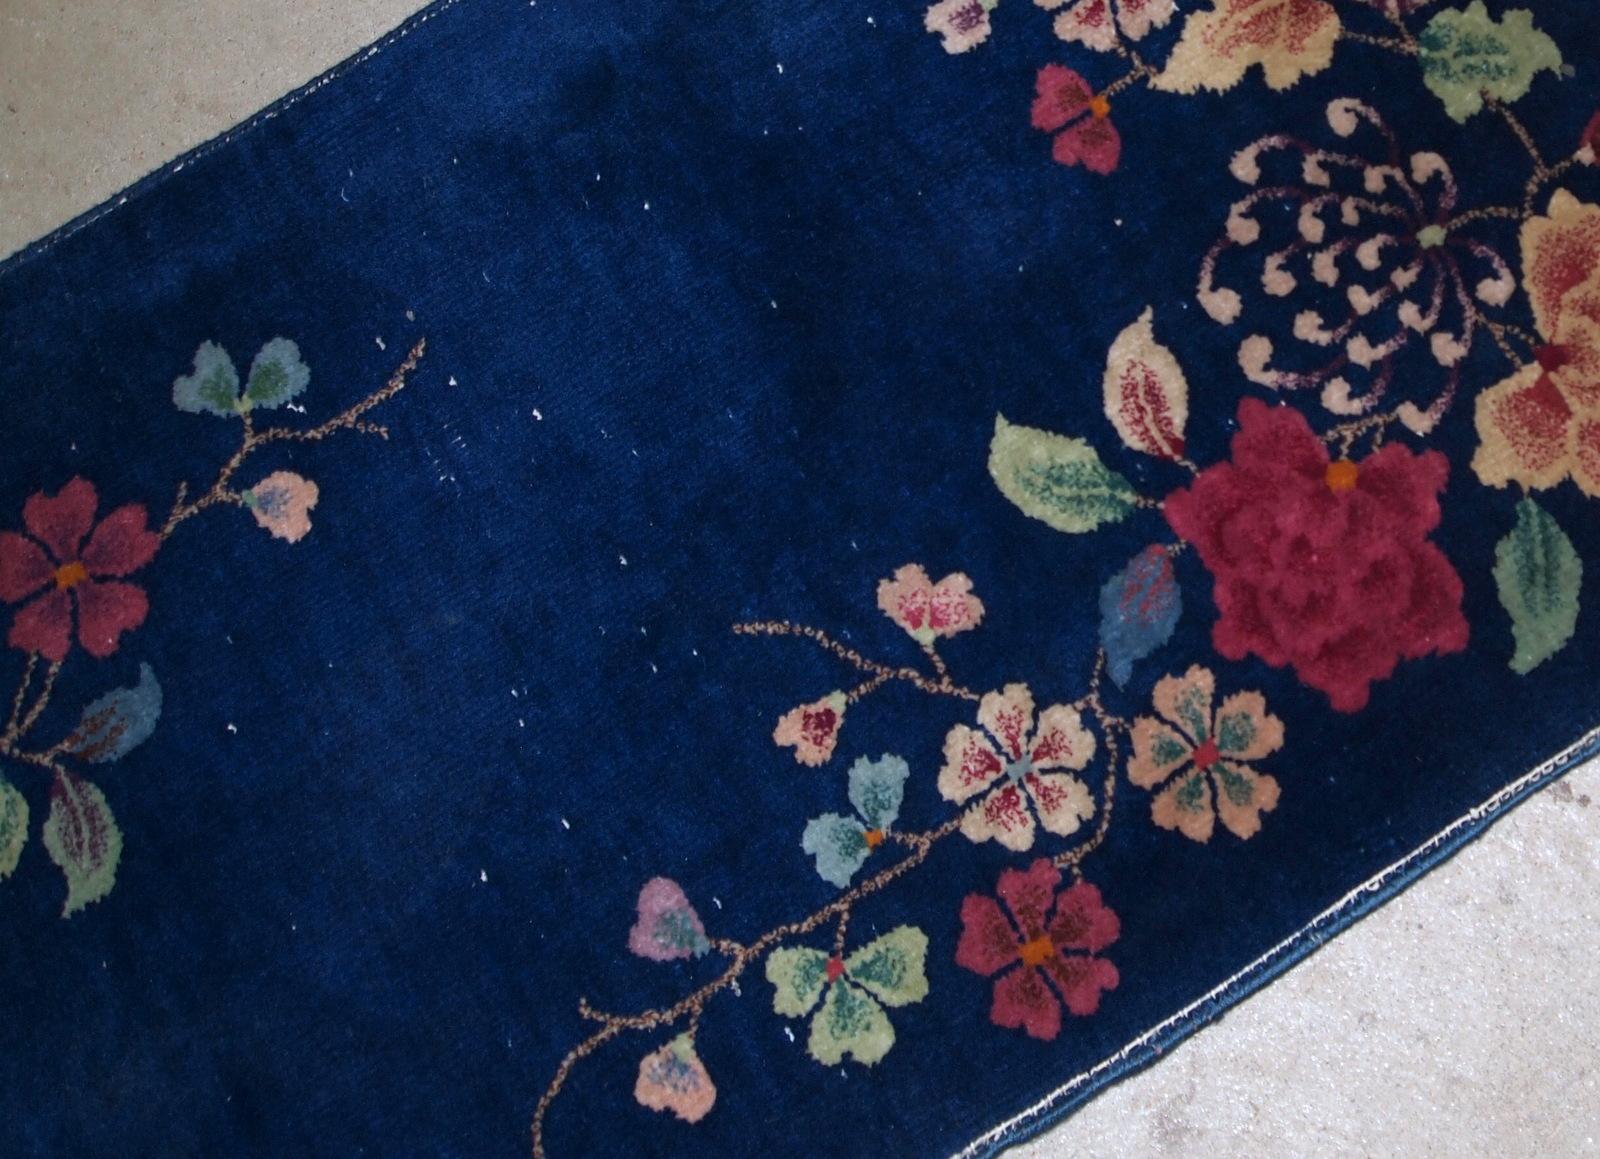 Hand made antique Art Deco Chinese rug in deep blue shade. The rug is in original condition, has some low pile.

-condition: original, some low pile,

-circa: 1920s,

-size: 2.1' x 4.1' (64cm x 125cm),

-material: wool,

-country of origin: